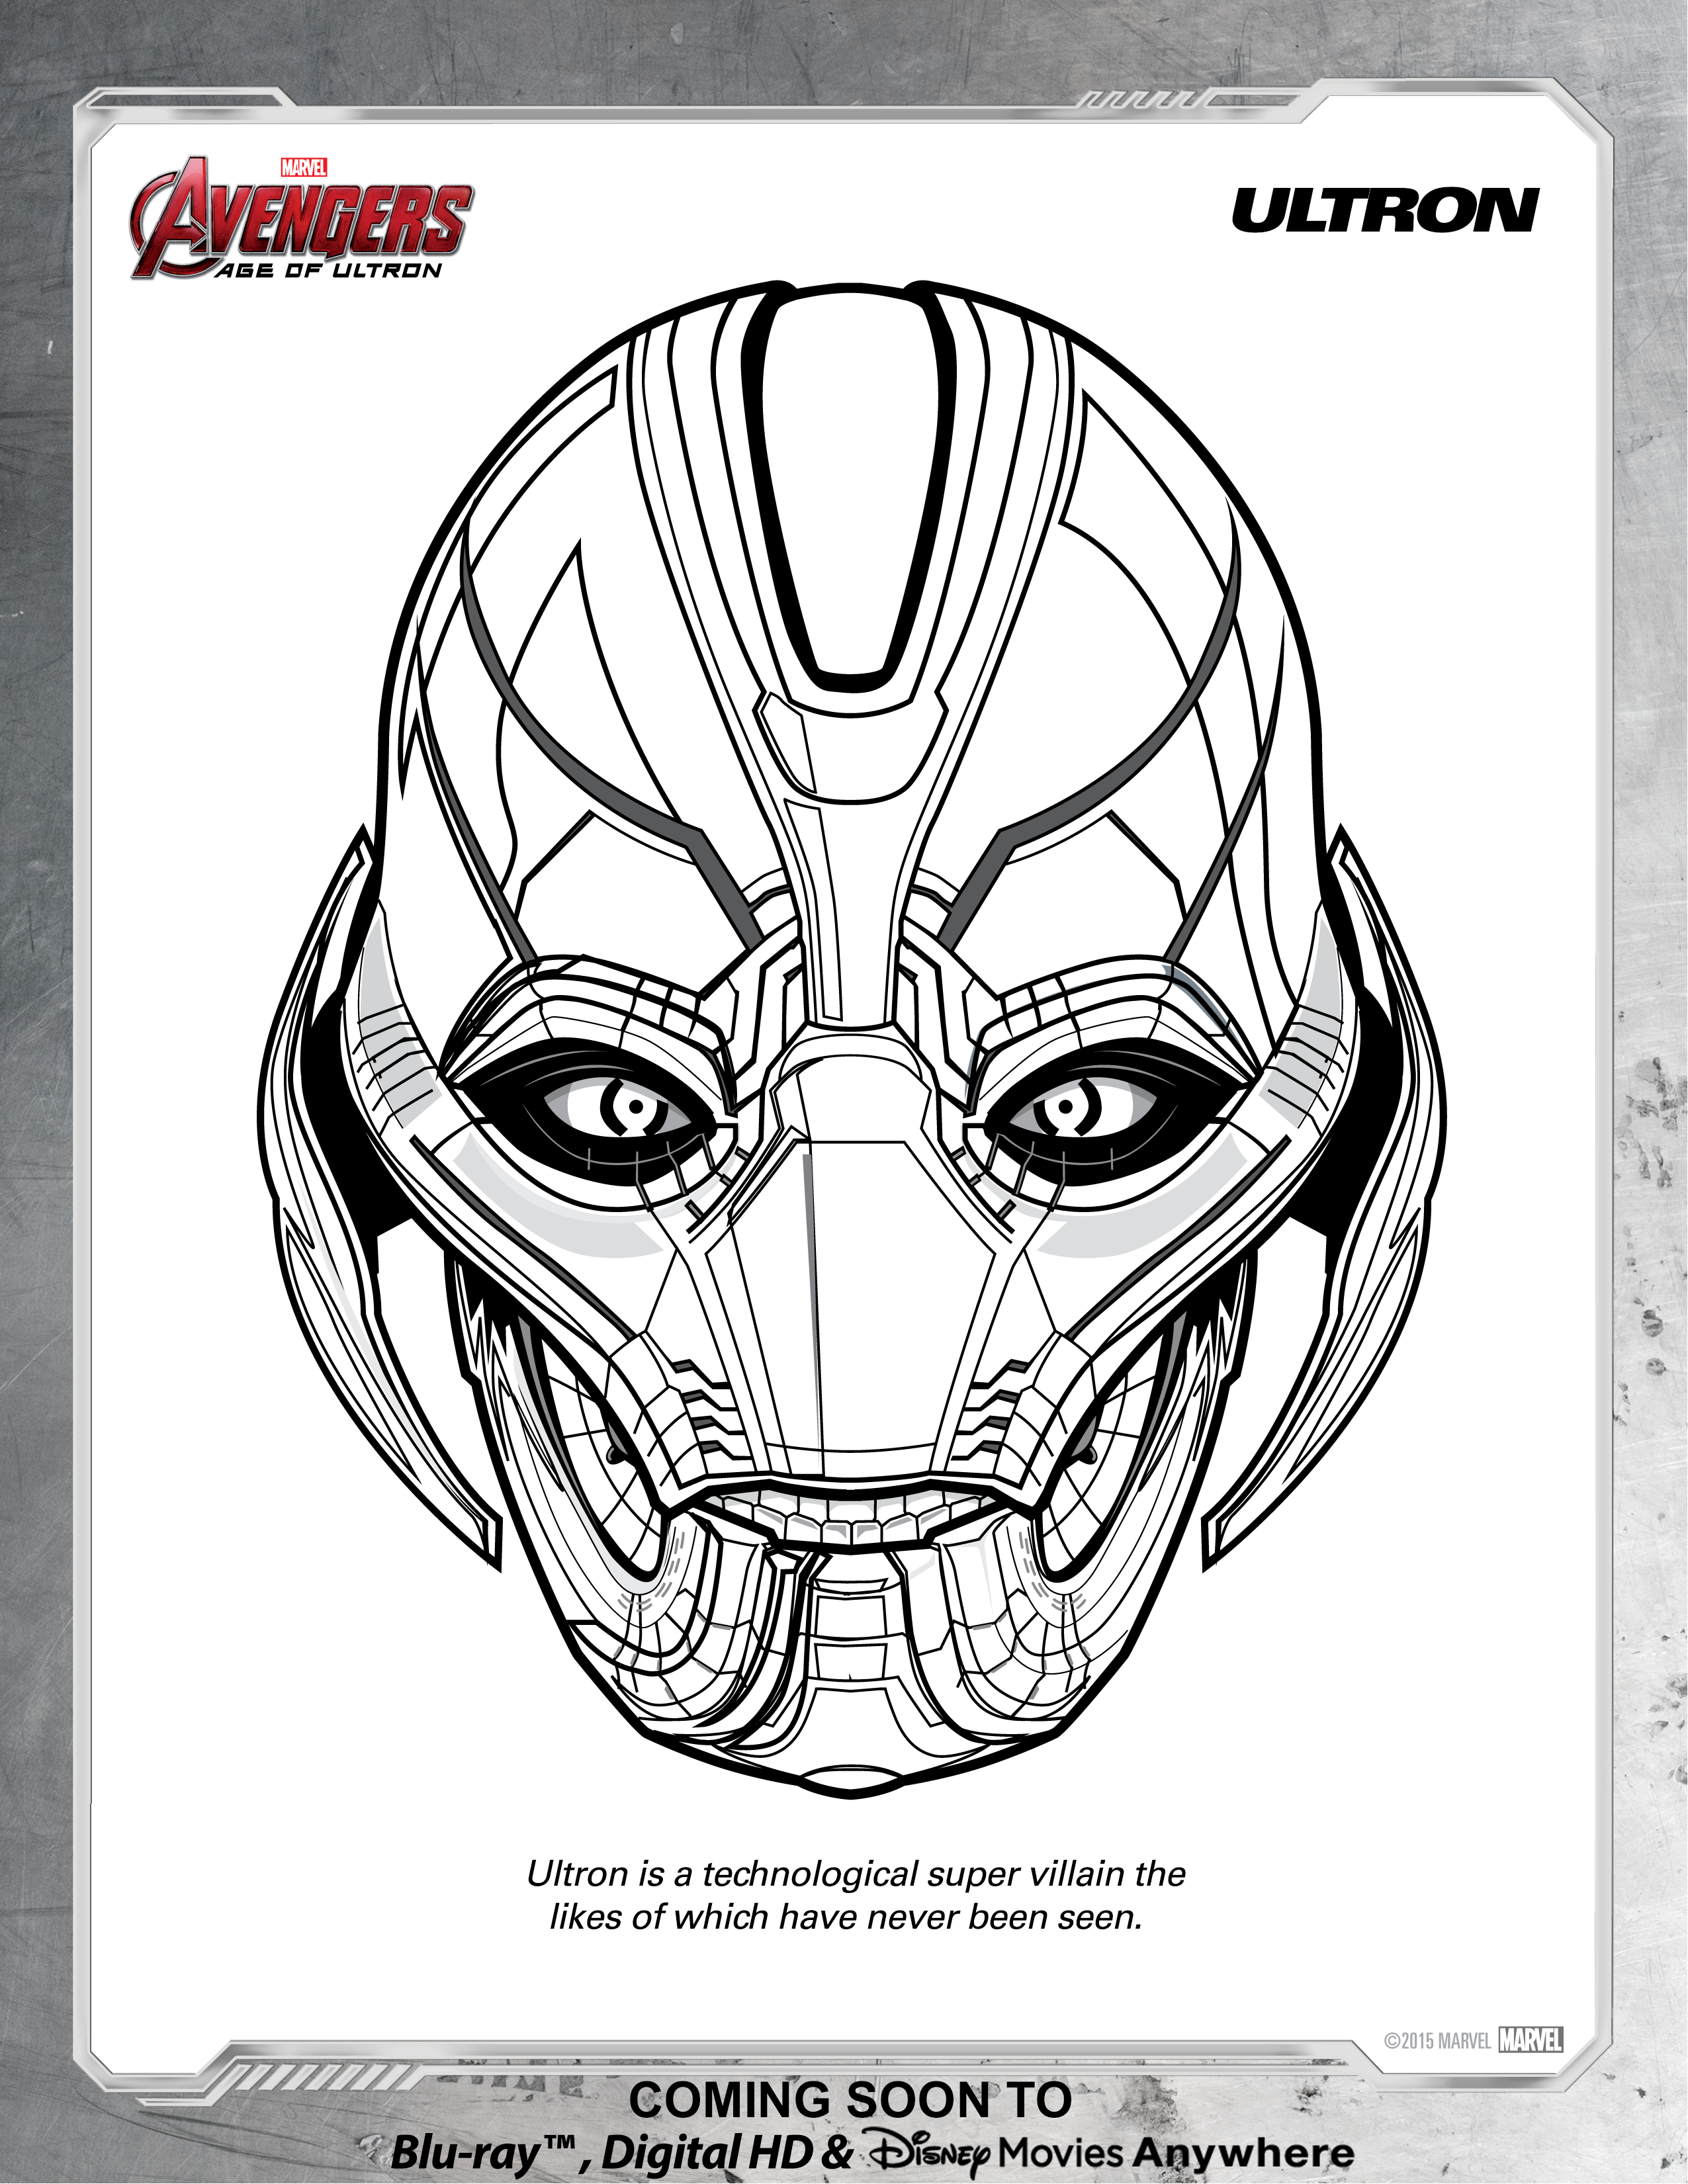 Avengers Ultron Coloring Page | Disney Movies